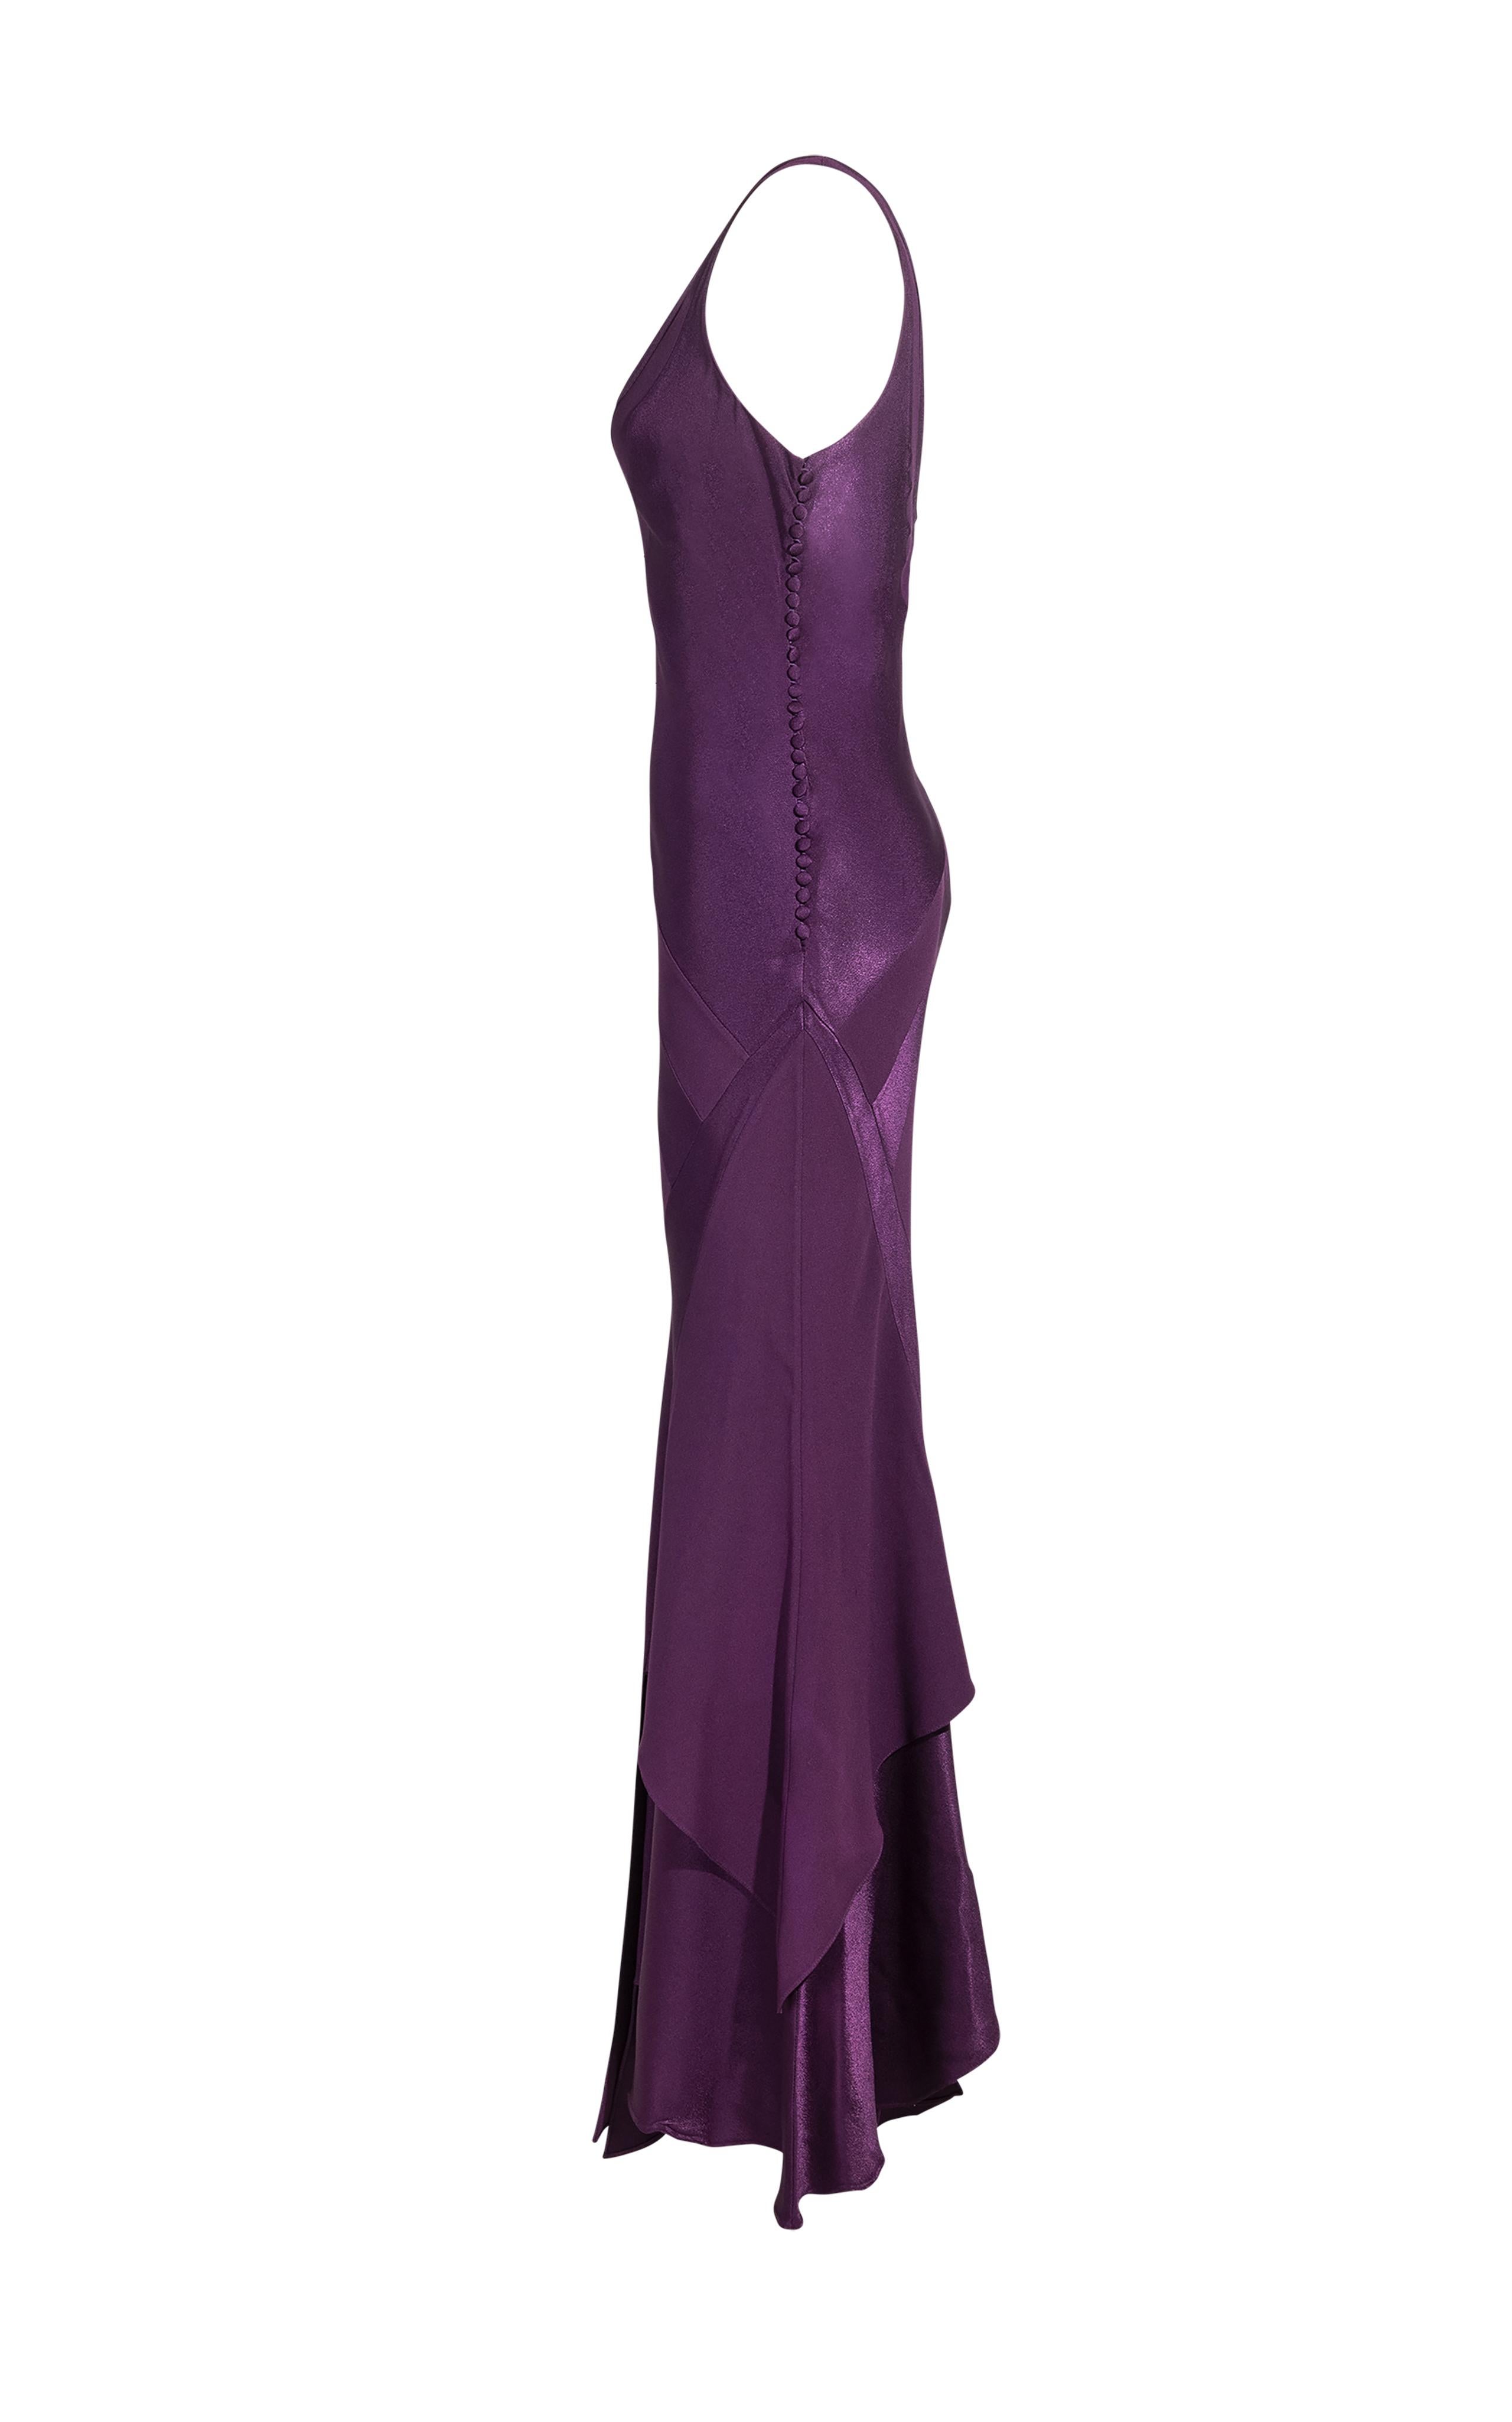 S/S 2005 Christian Dior by John Galliano purple v-neck gown with spiraling geometric details that shape and flatter the body, with deconstructed handkerchief hem. Sleeveless gown with signature 1930's style fabric buttons up the side. 